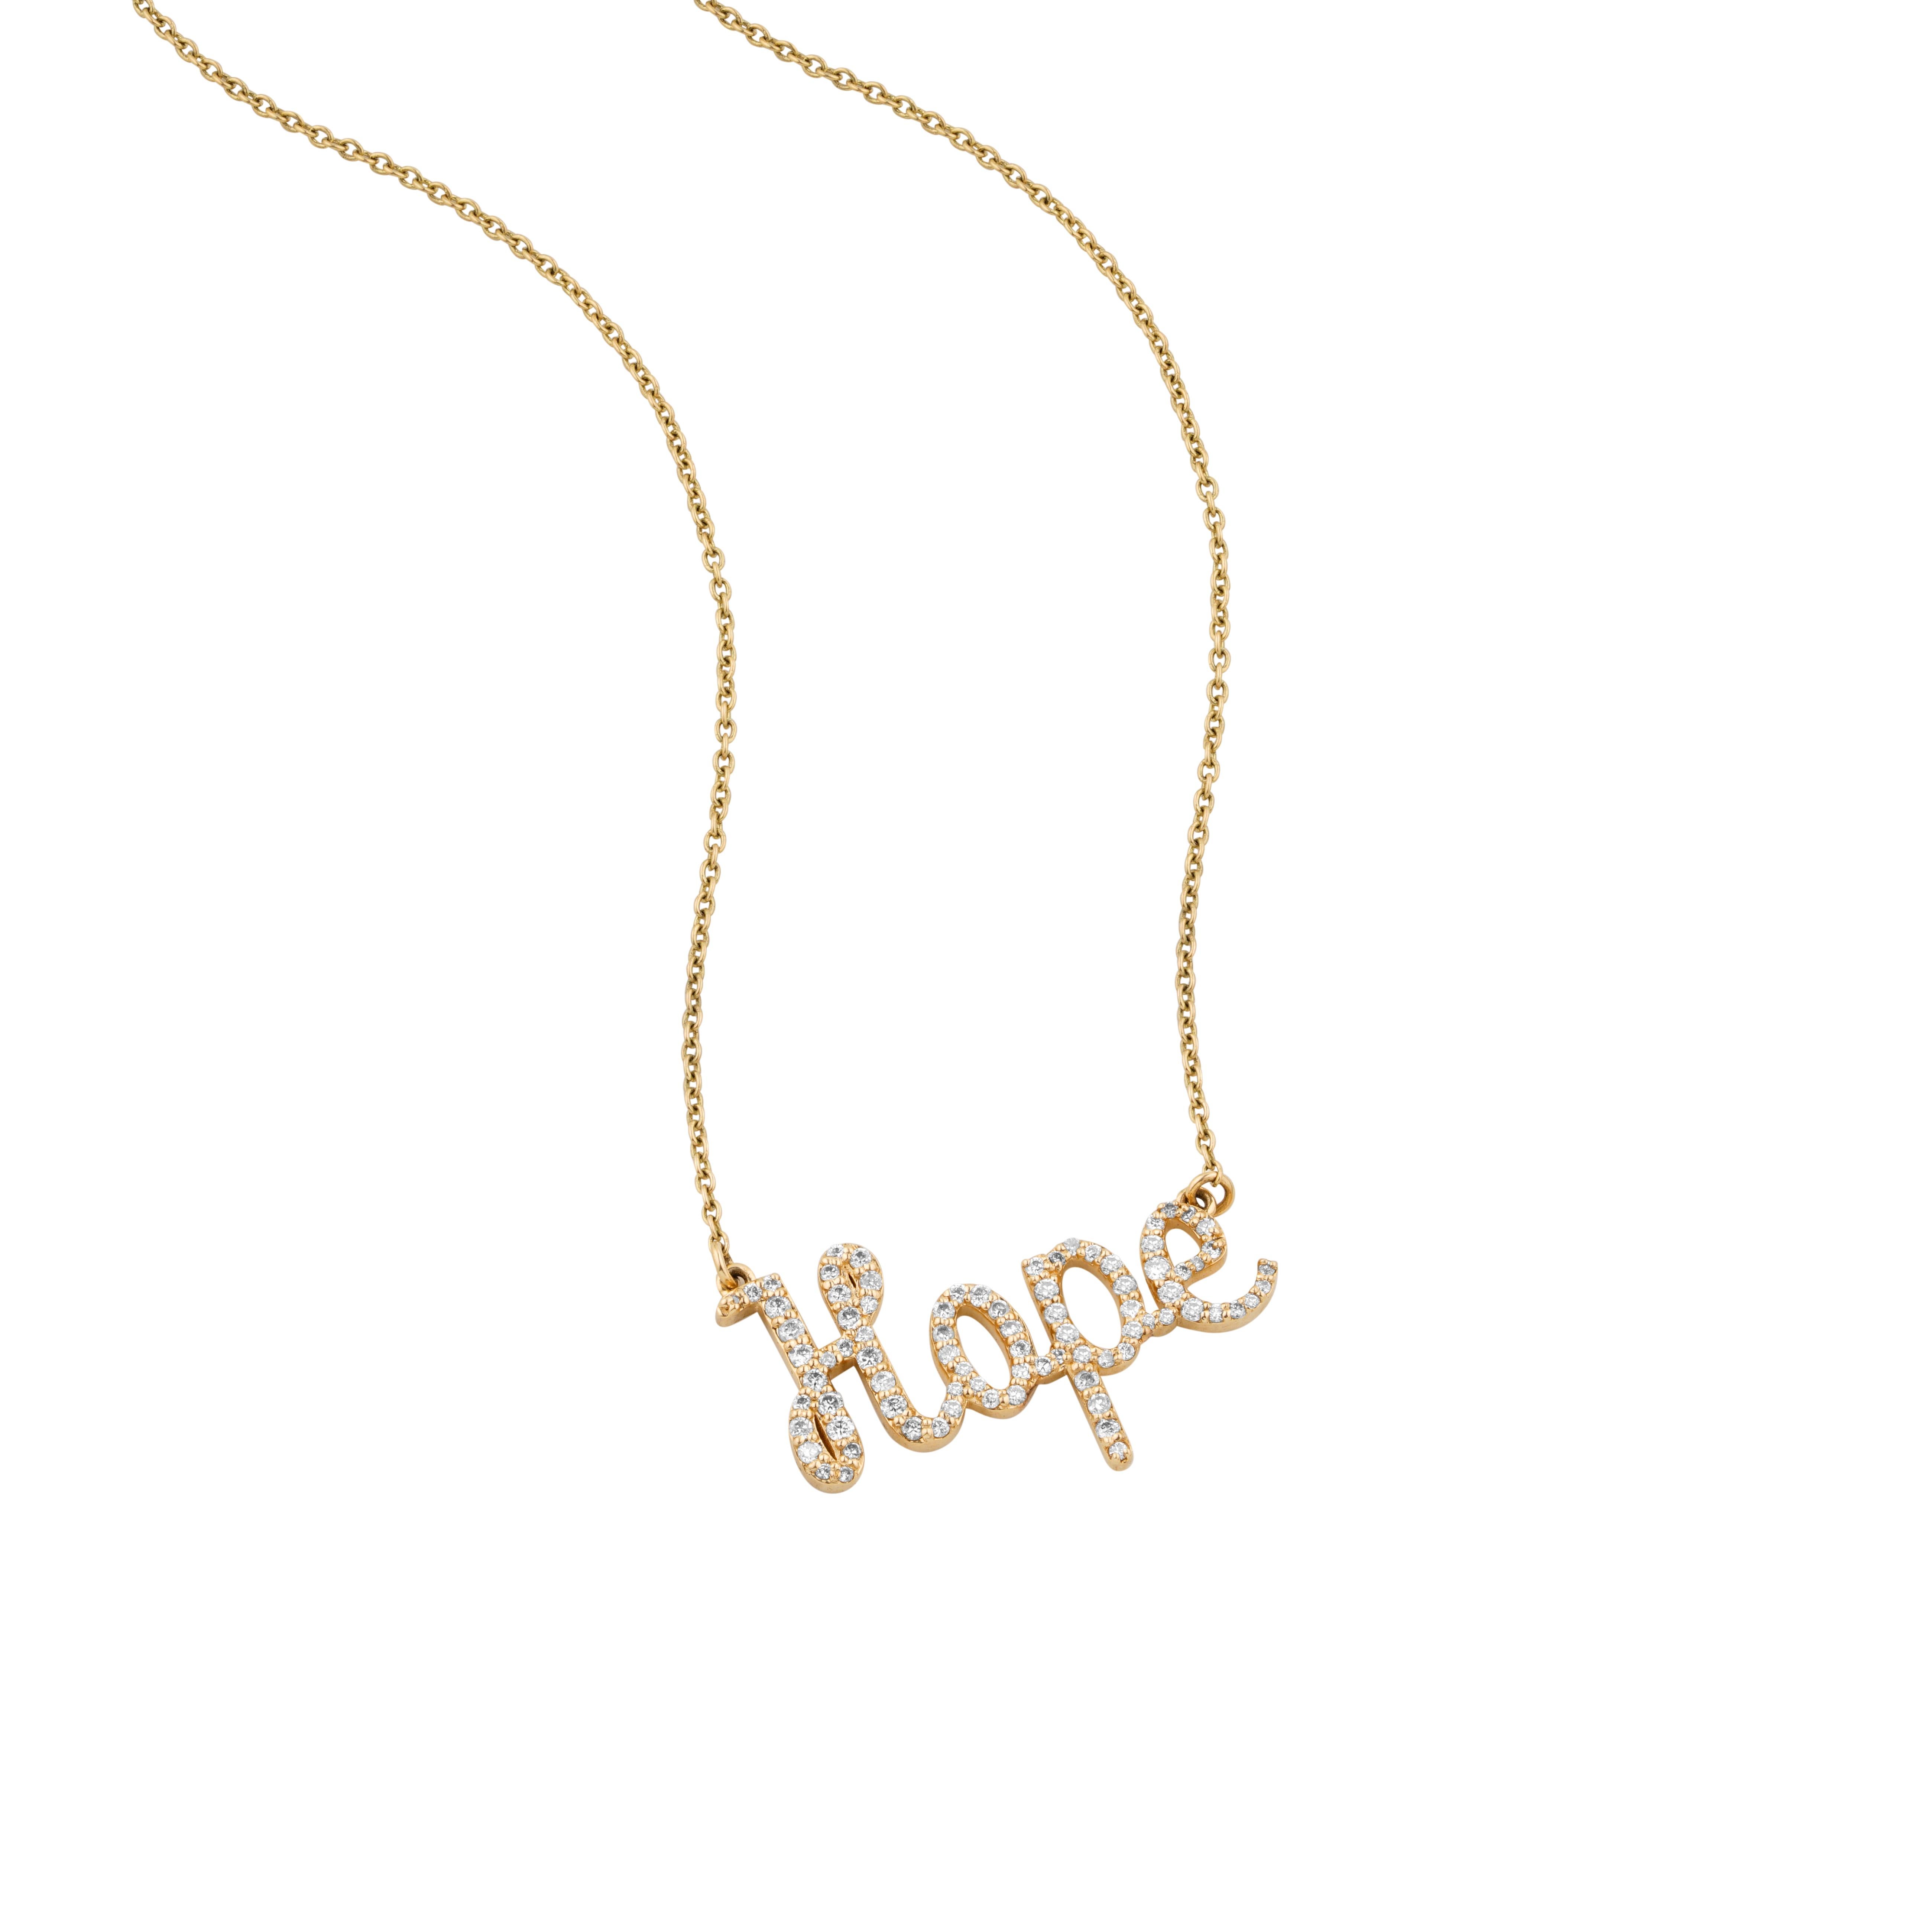 The Diamond Hope Pendant Necklace is a delicate gold pendant with the word 